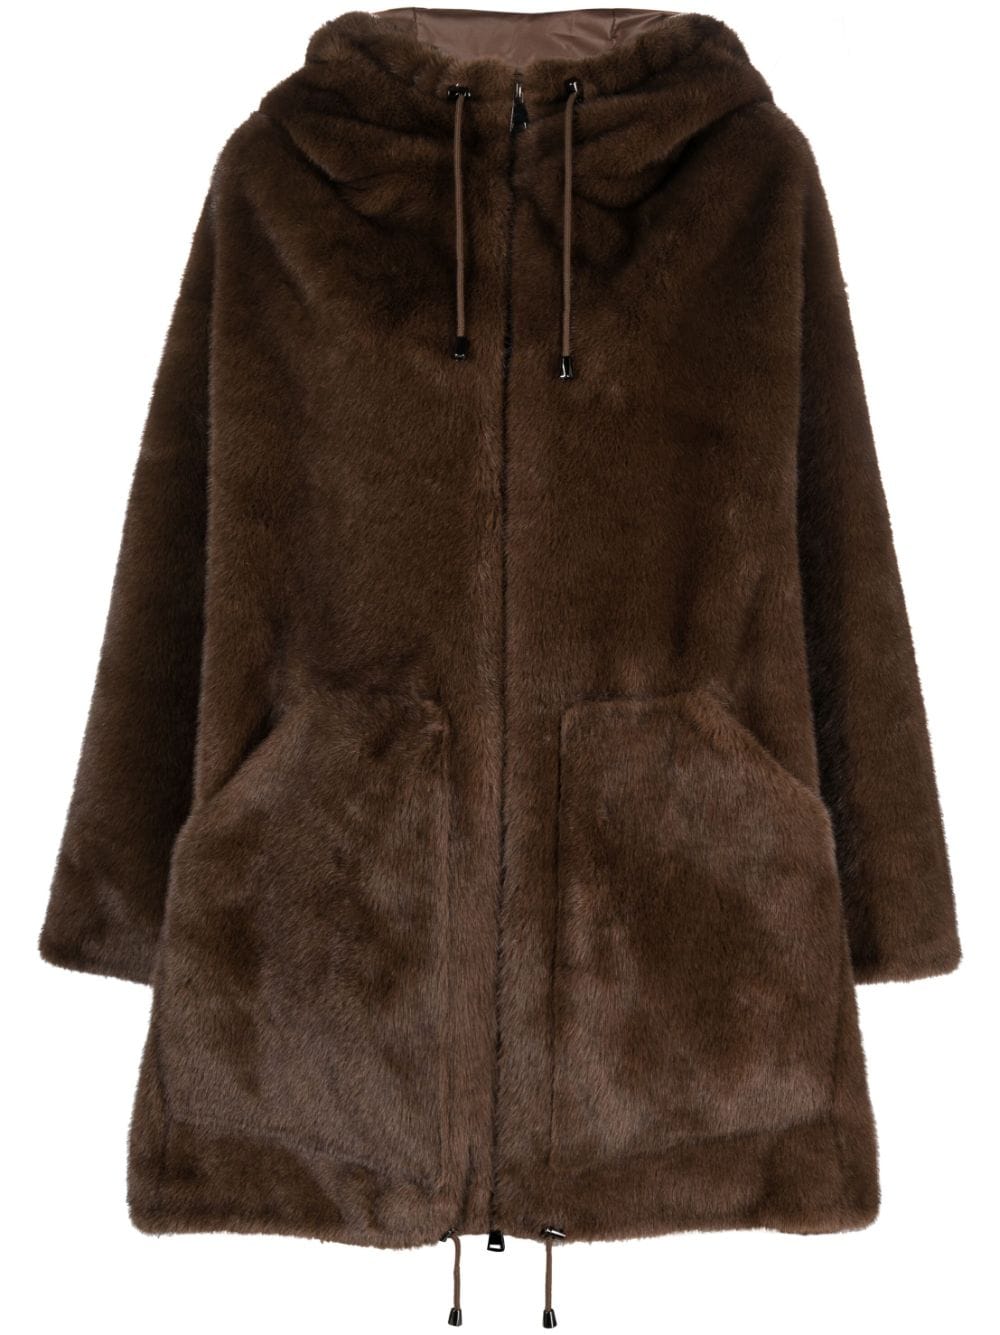 P.A.R.O.S.H. zipped-up shearling hooded coat - Brown von P.A.R.O.S.H.